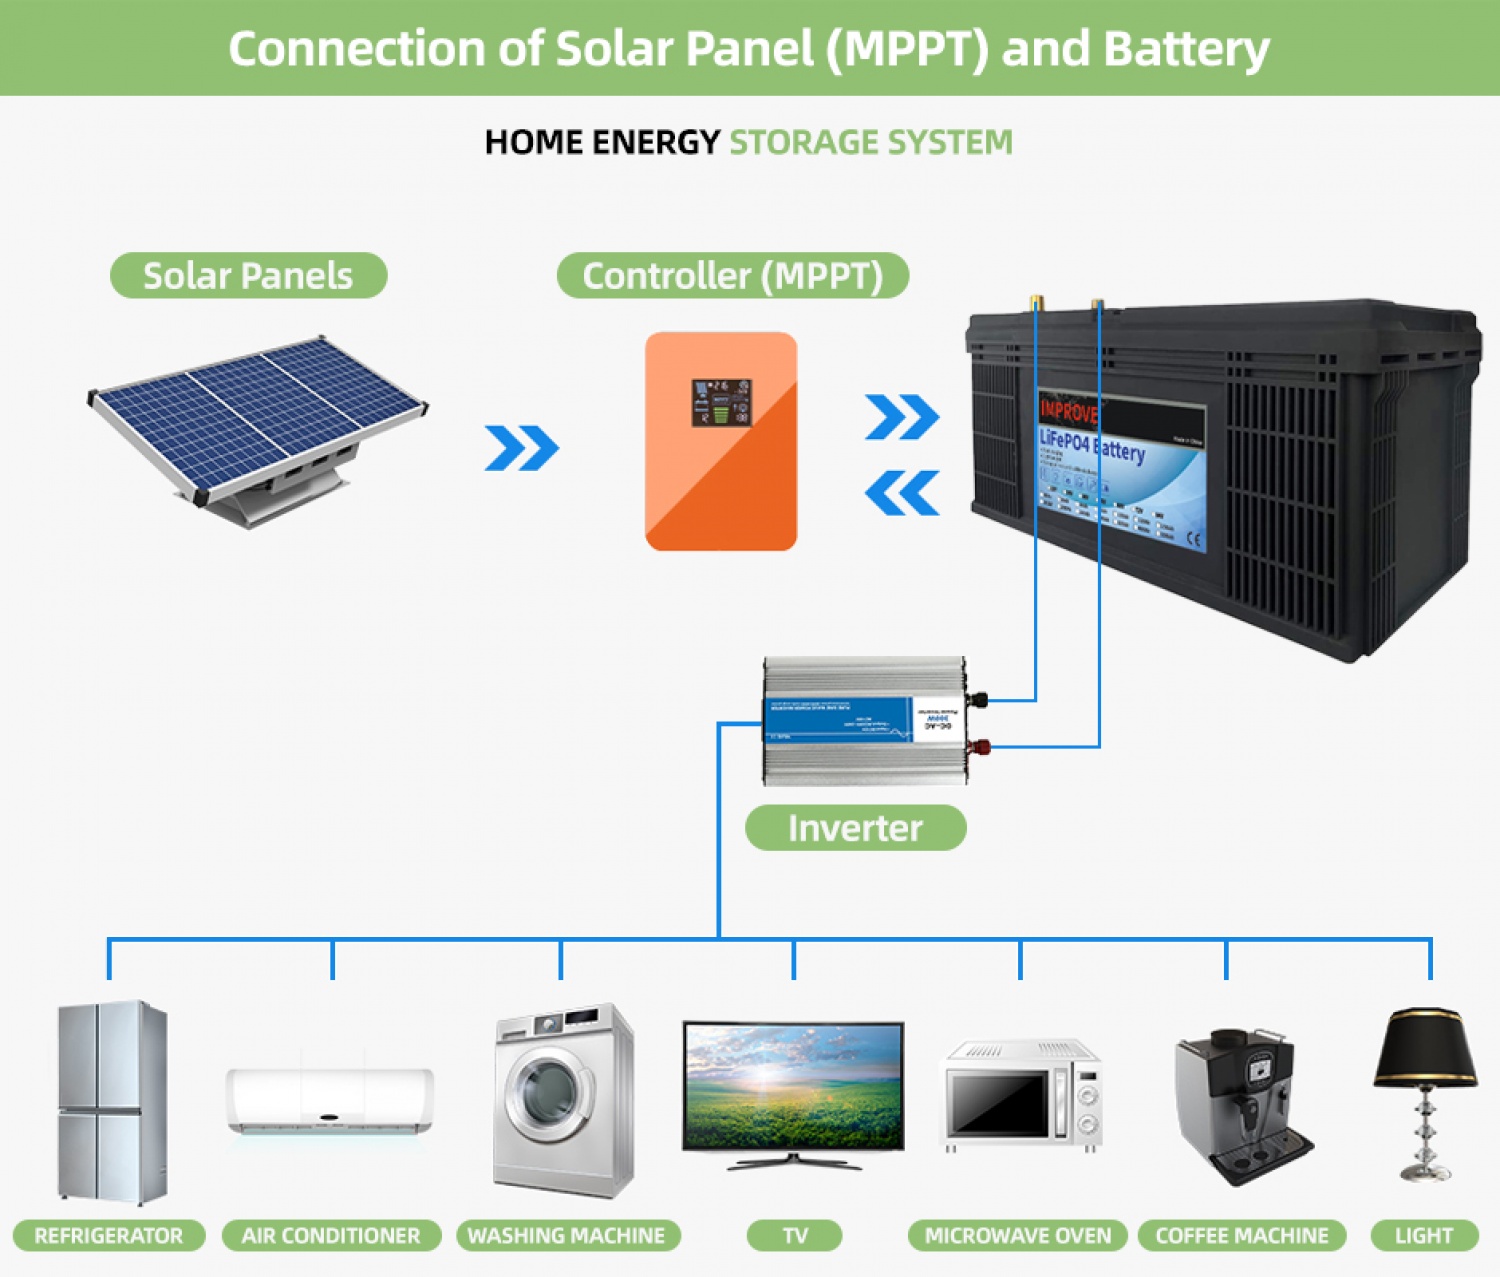 Connection of Solar Panel (MPPT) and Battery